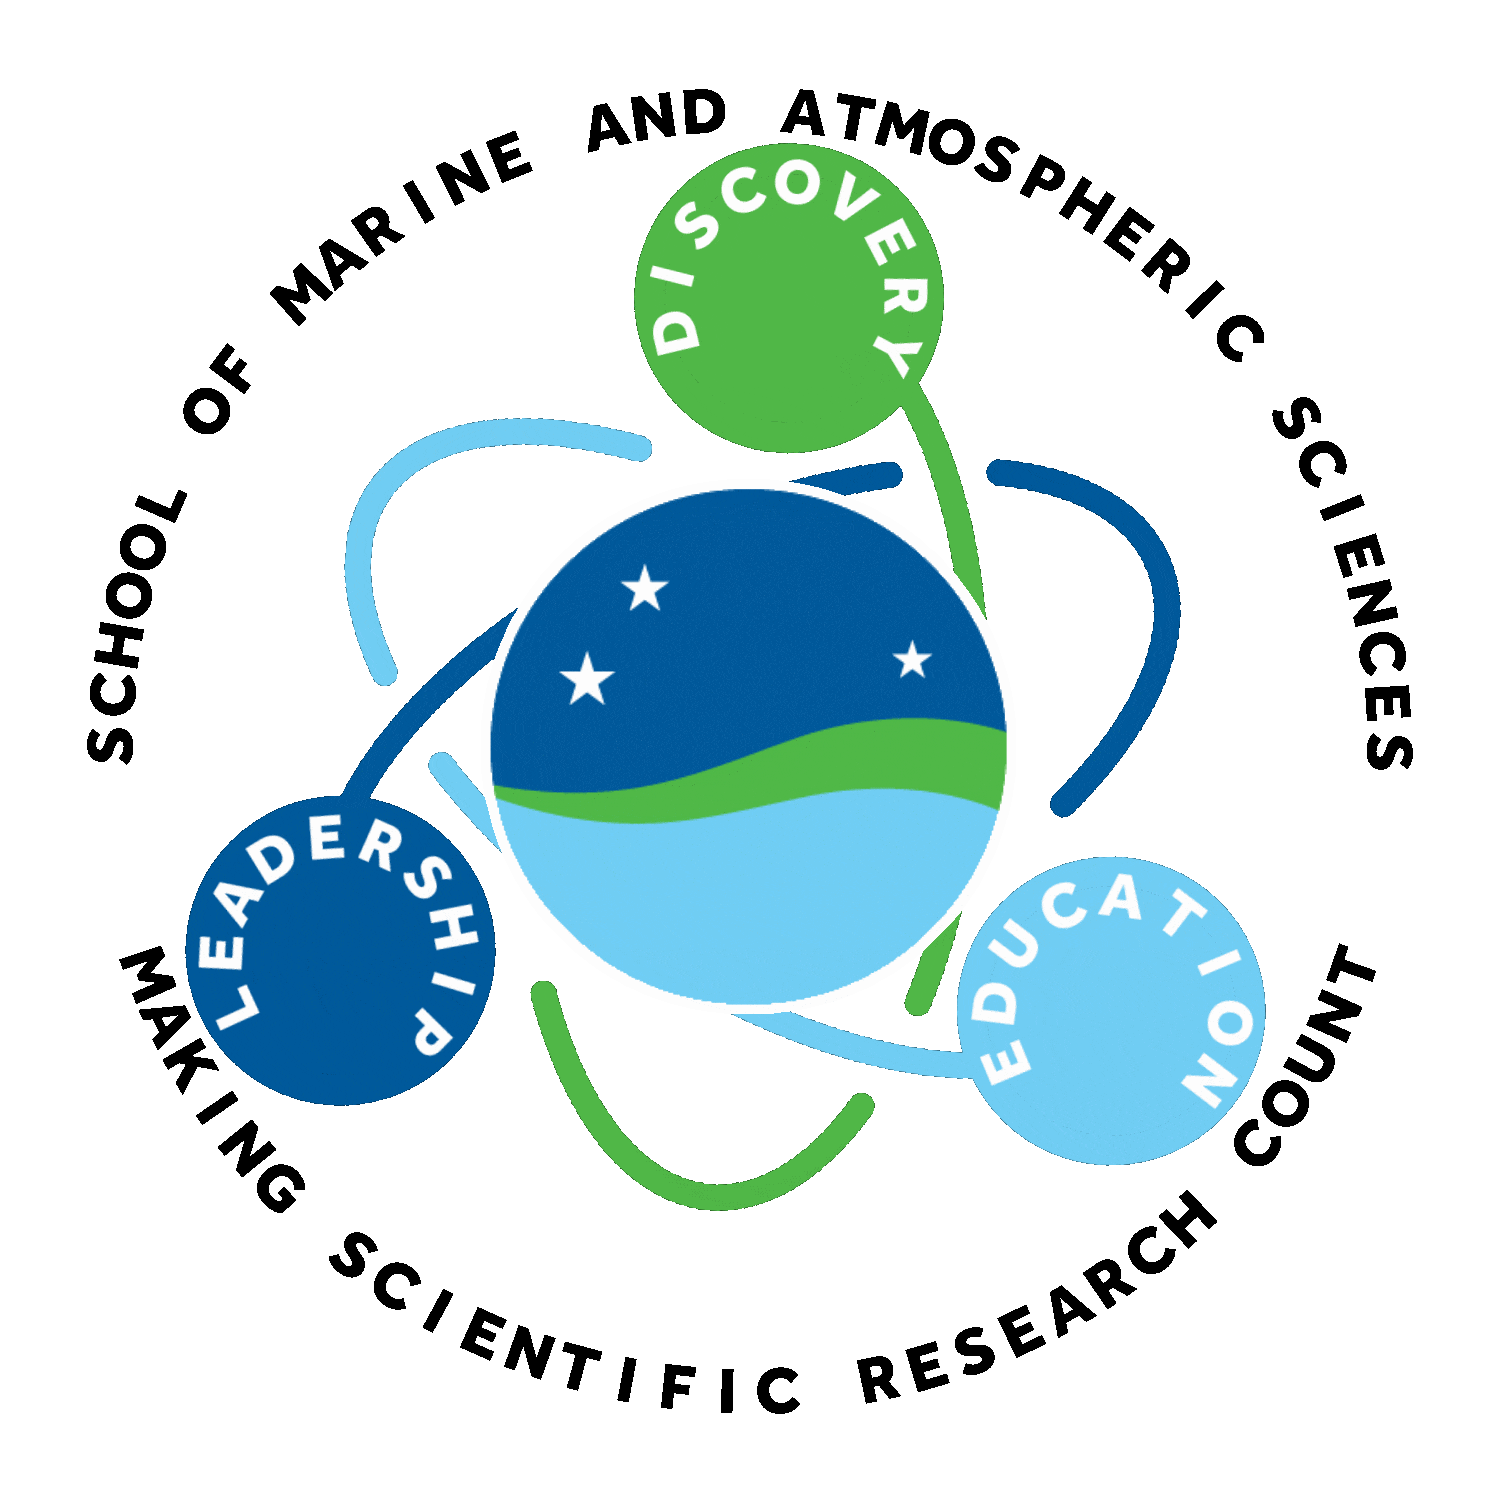 The Three Pillars of SoMAS: Marine Sciences, Atmospheric Sciences, and Sustainability work in harmony with our three goals of Discovery, Education, and Leadership 